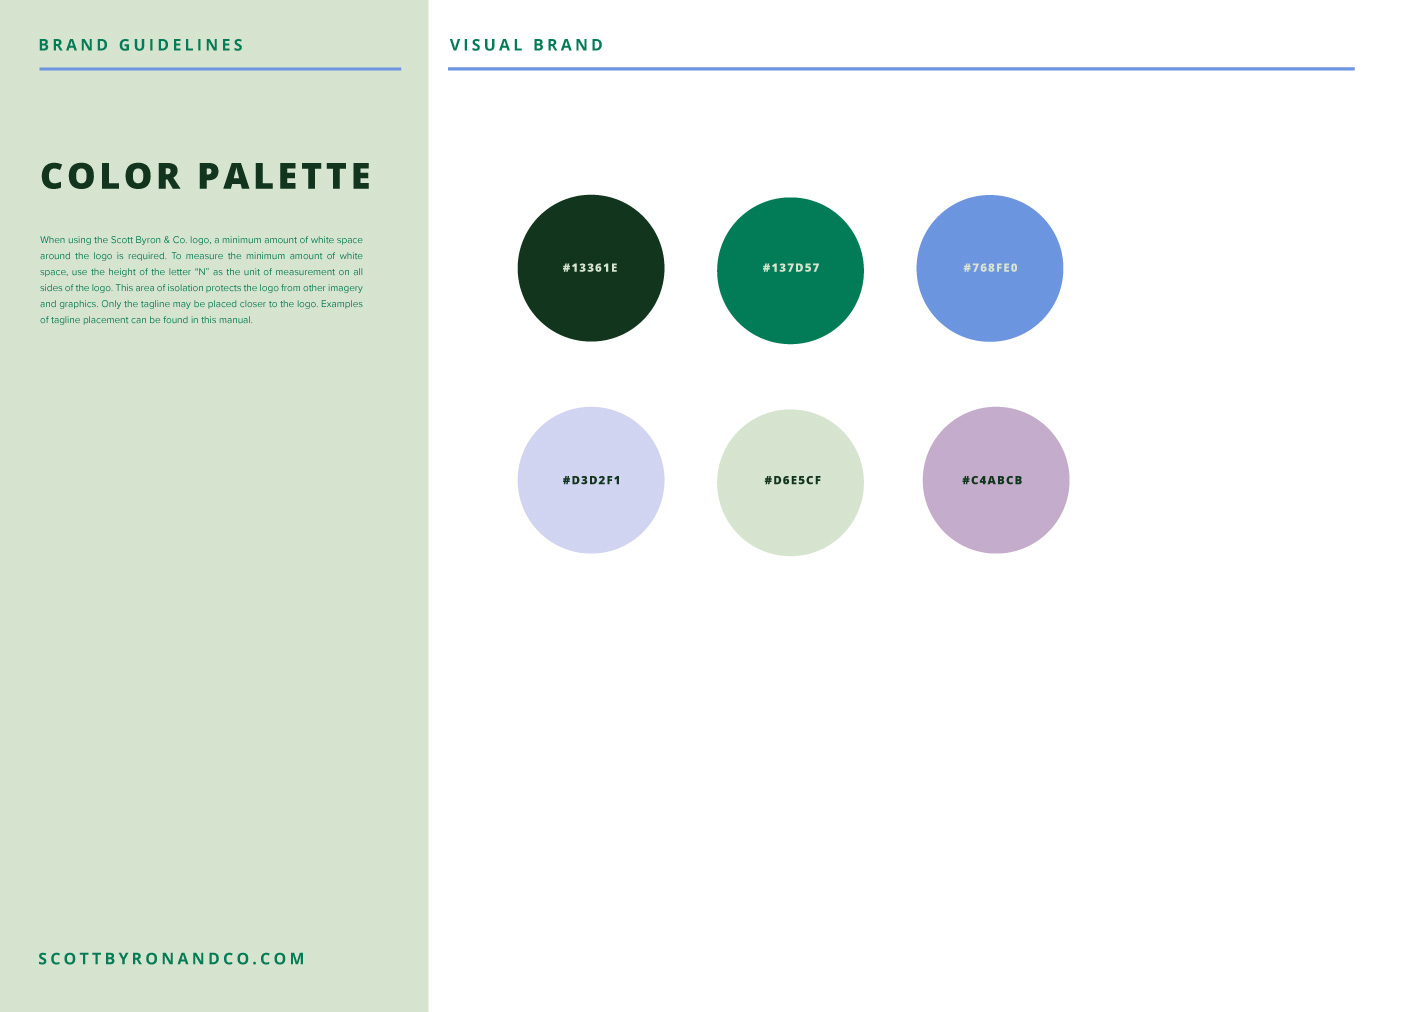 A "Color Palette" spread of the brand book.